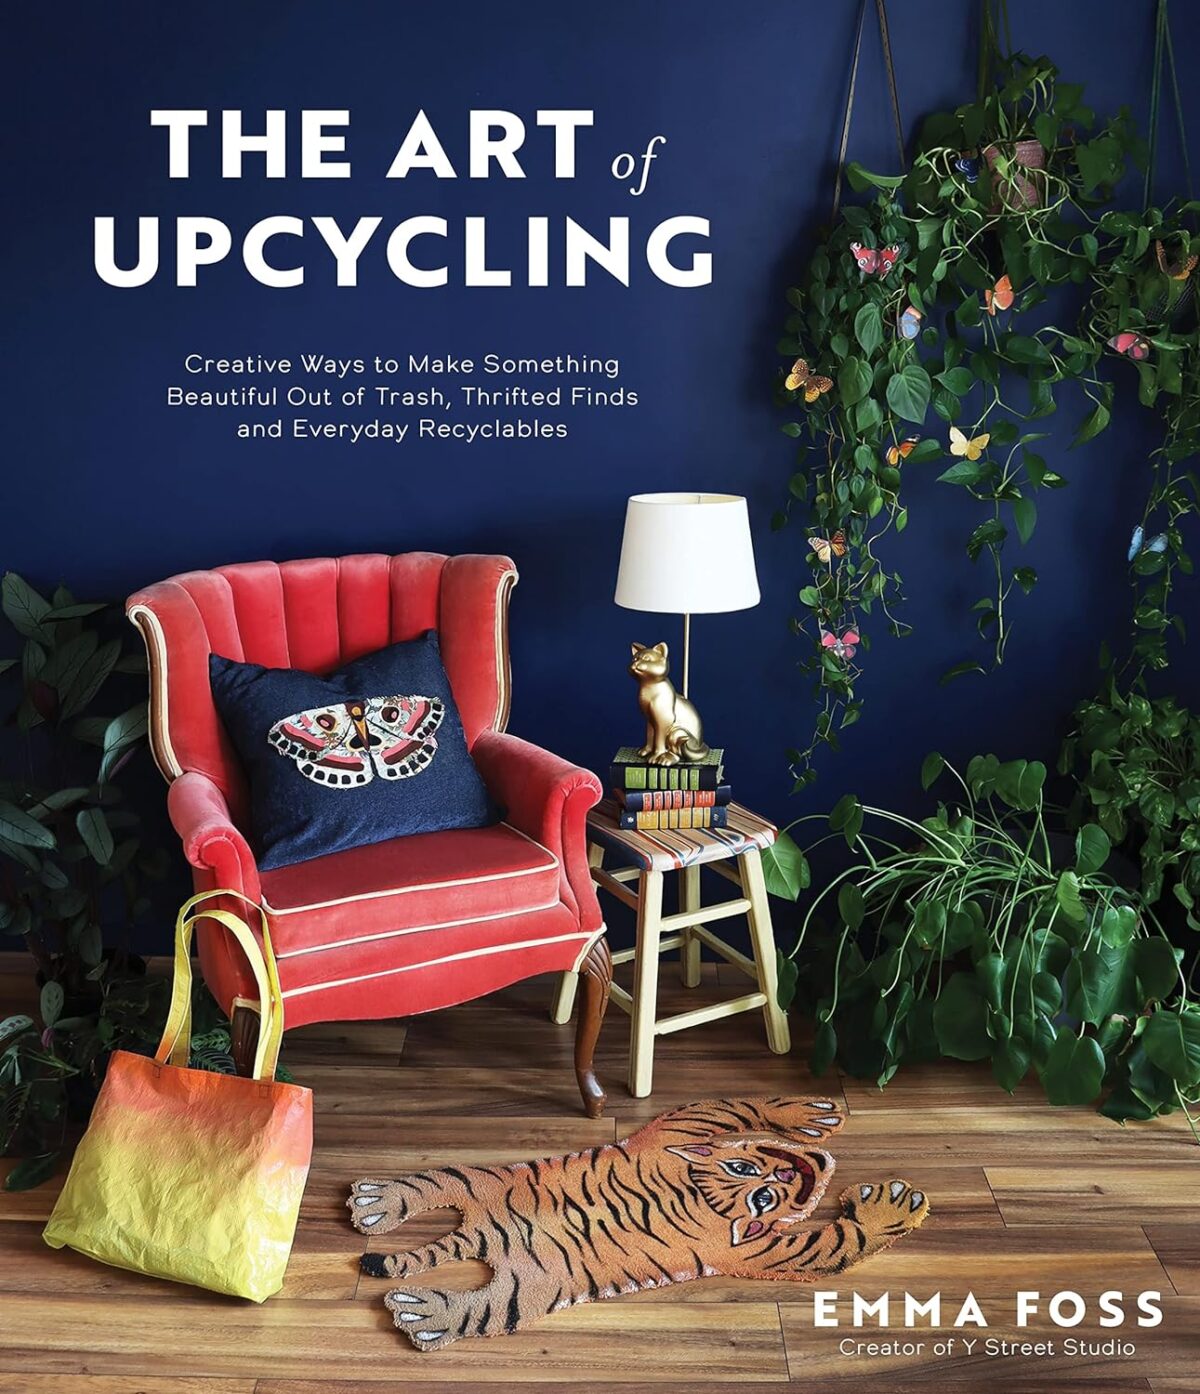 Amazon affiliate link to The Art of Upcycling: Creative Ways to Make Something Beautiful Out of Trash, Thrifted Finds and Everyday Recyclables by Emma Foss